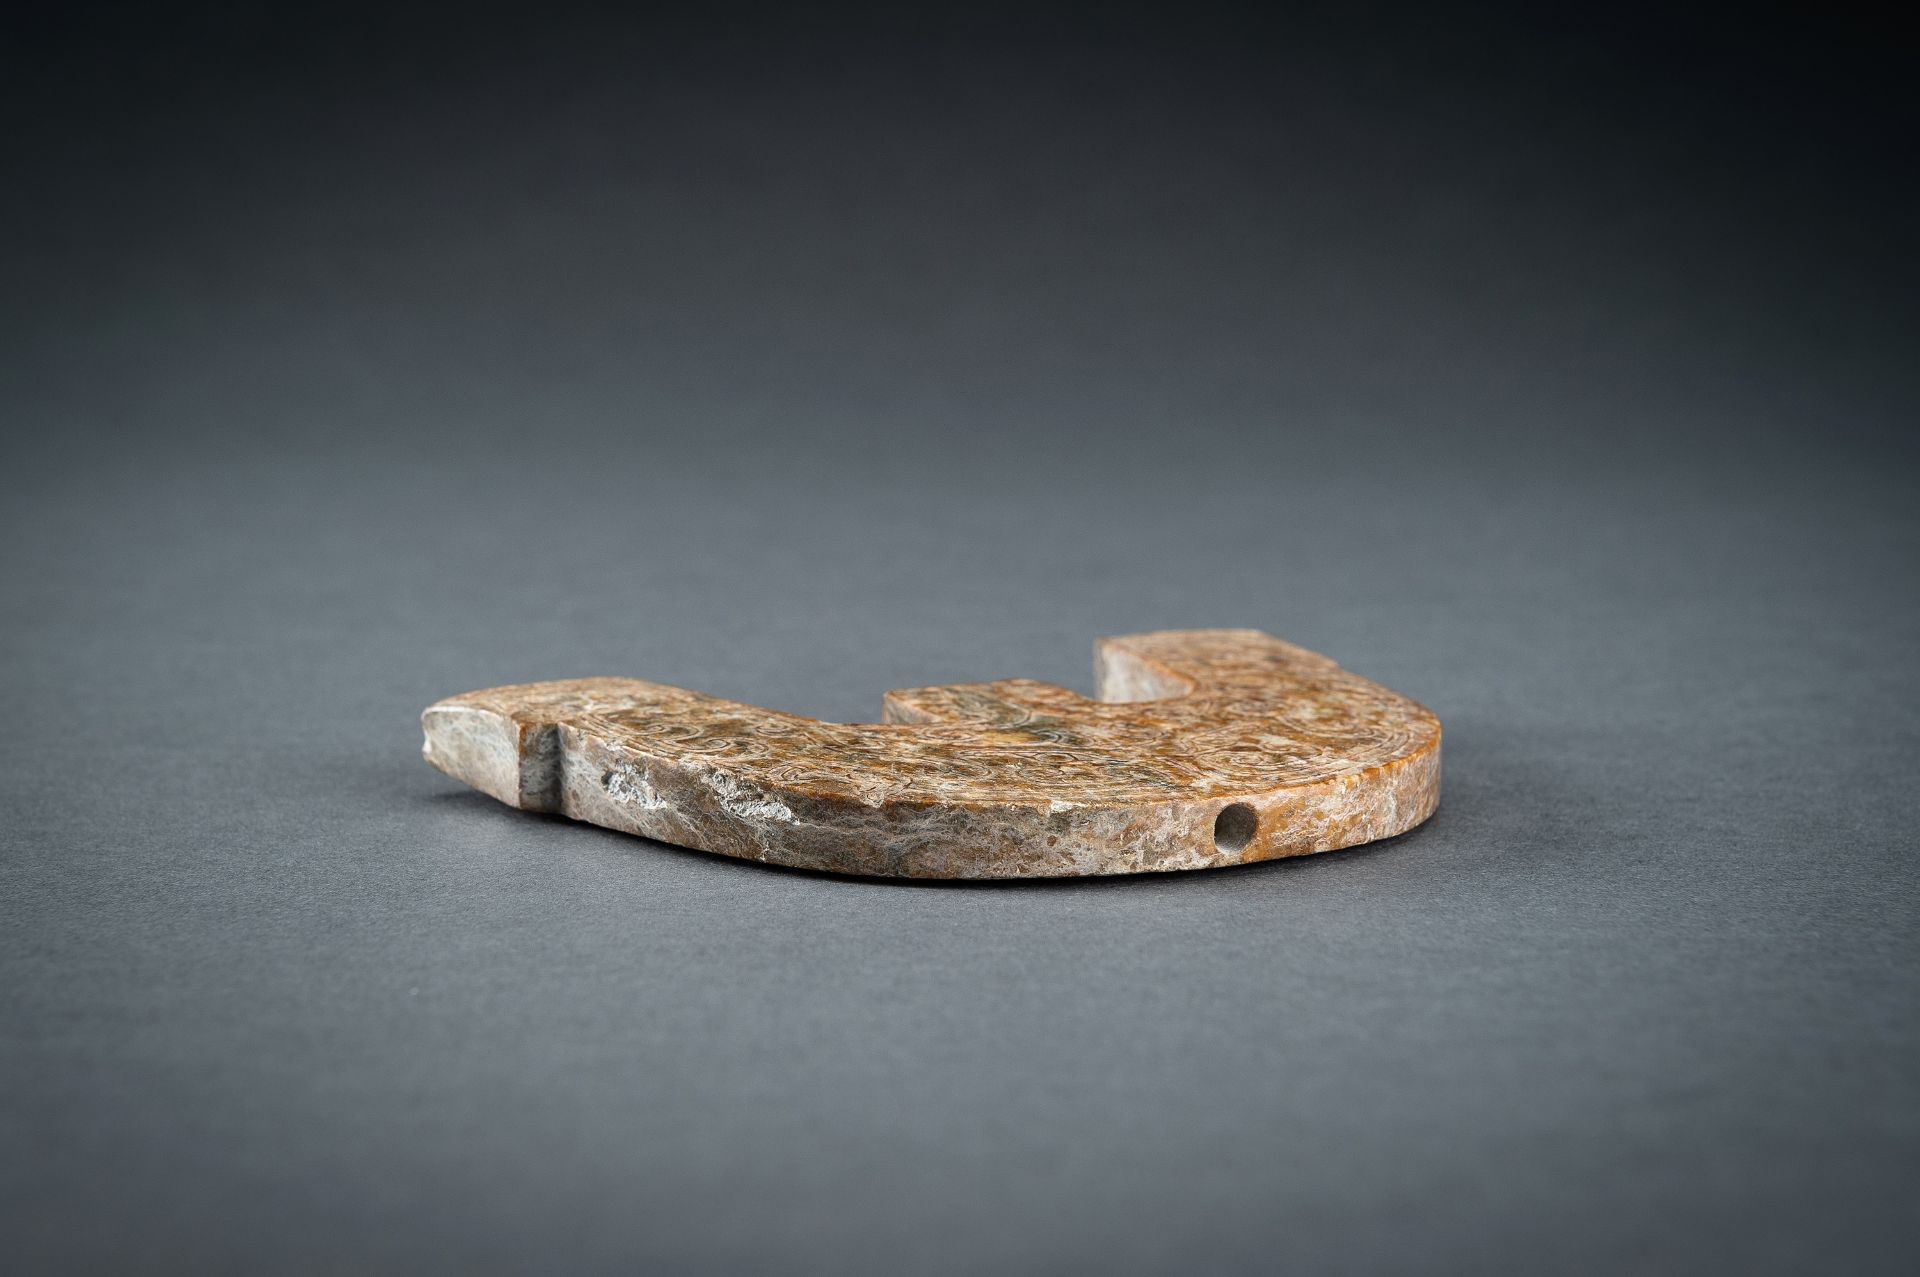 AN ARCHAISTIC THREE-PRONGED JADE ORNAMENT, QING - Image 8 of 16